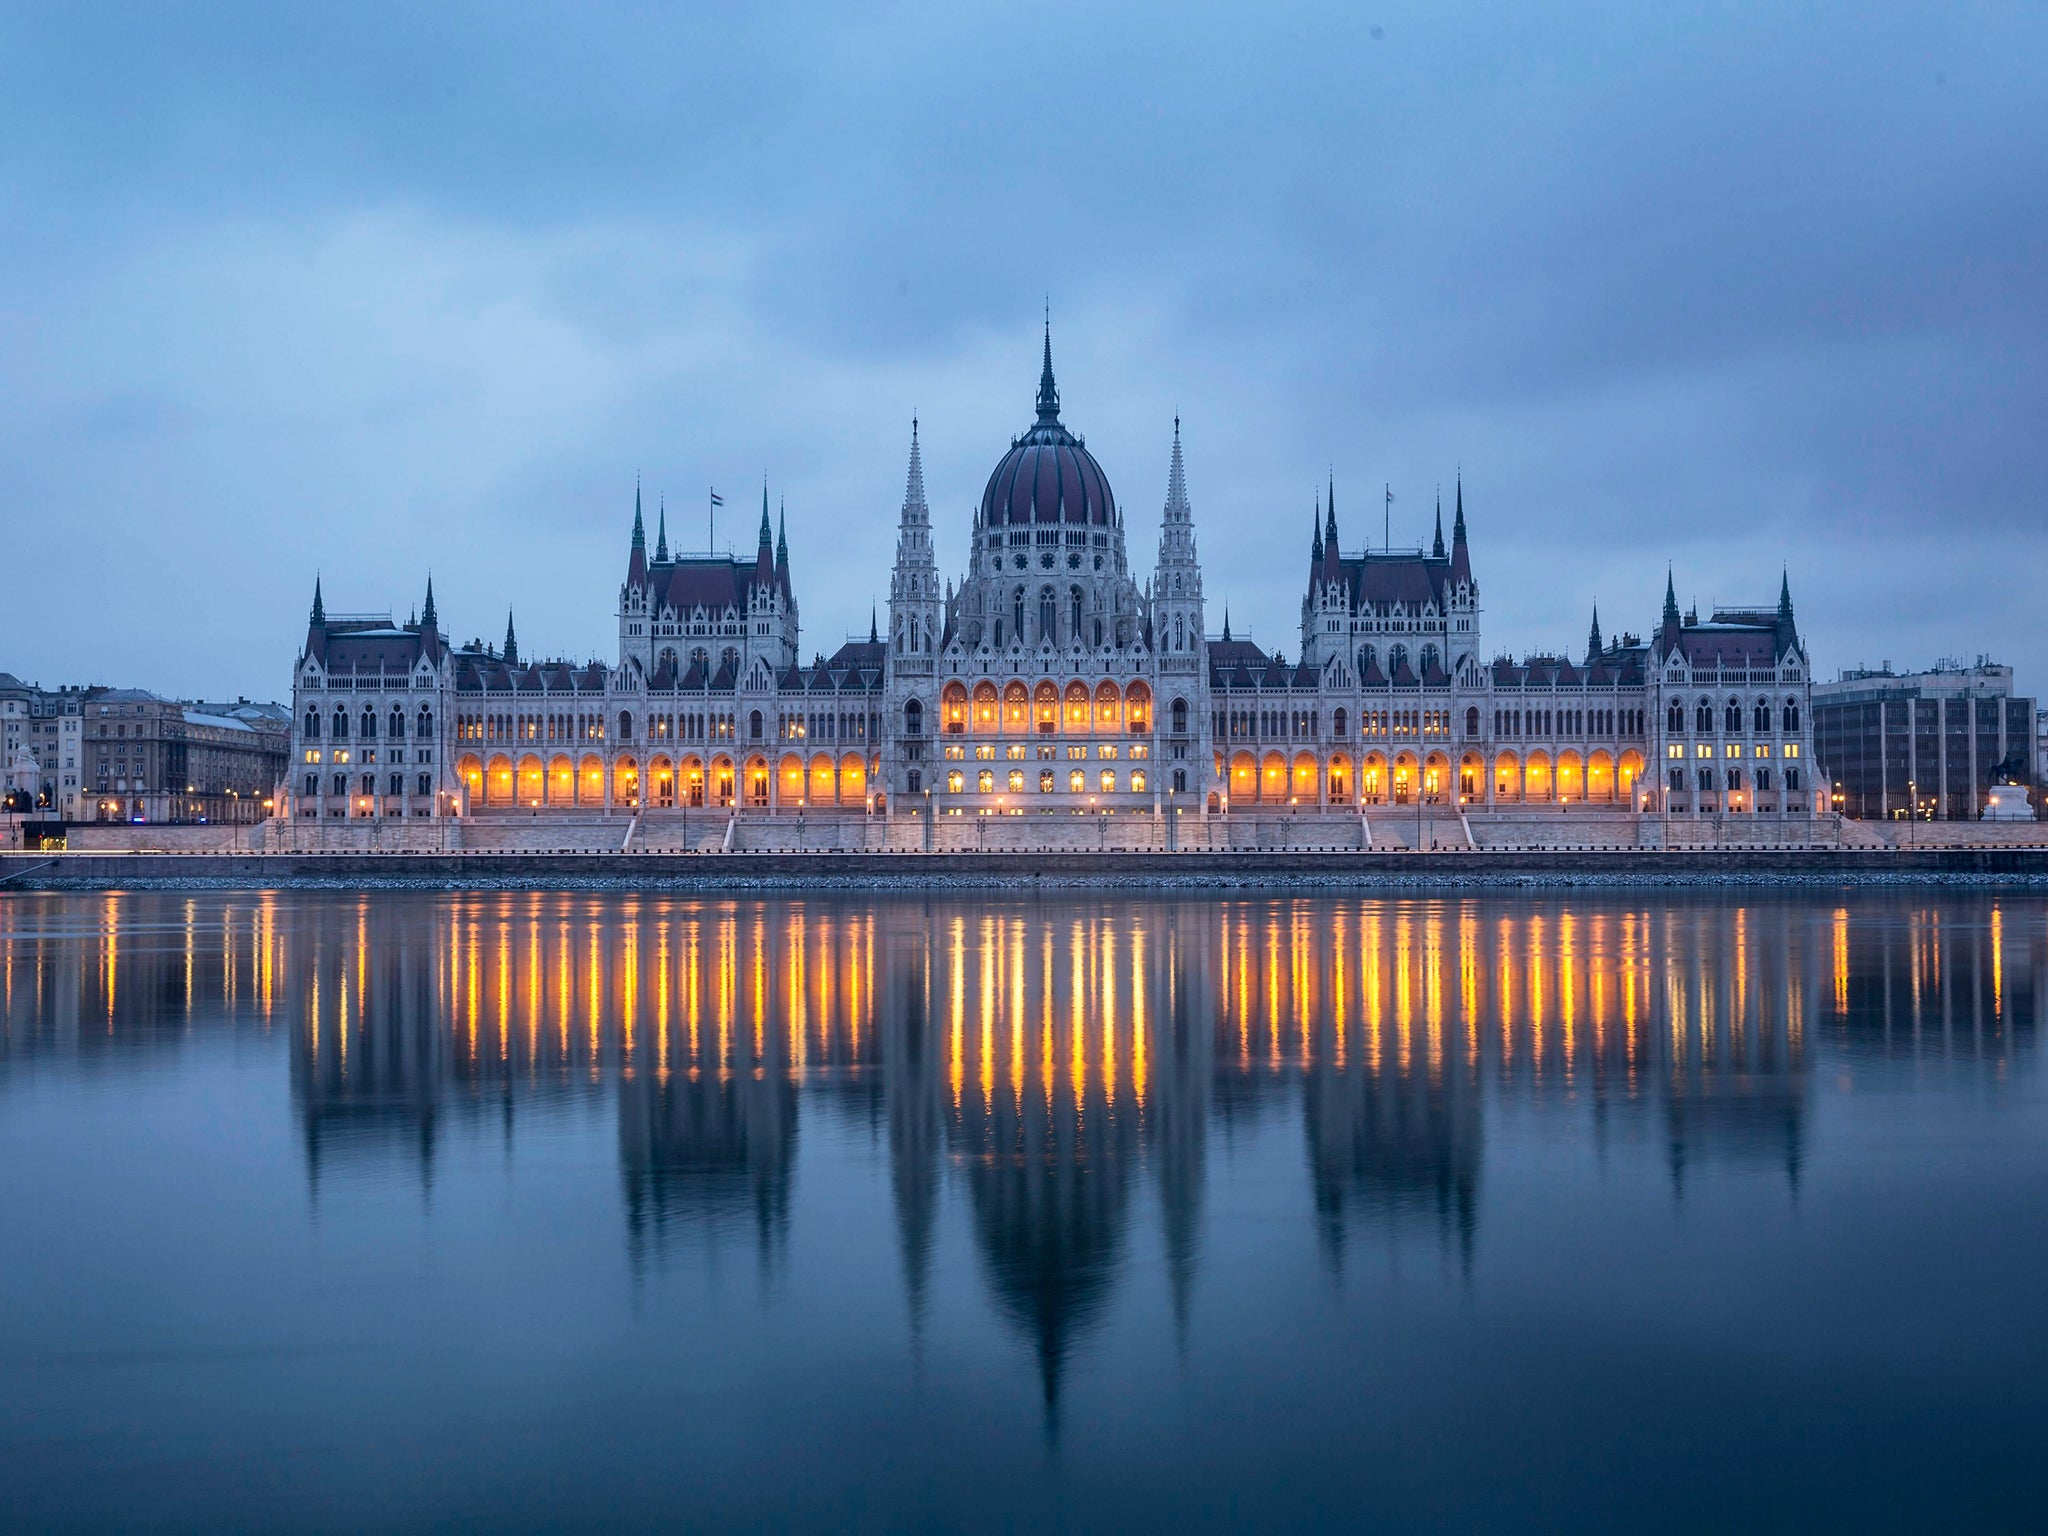 Hungary's parliament buildings in Budapest